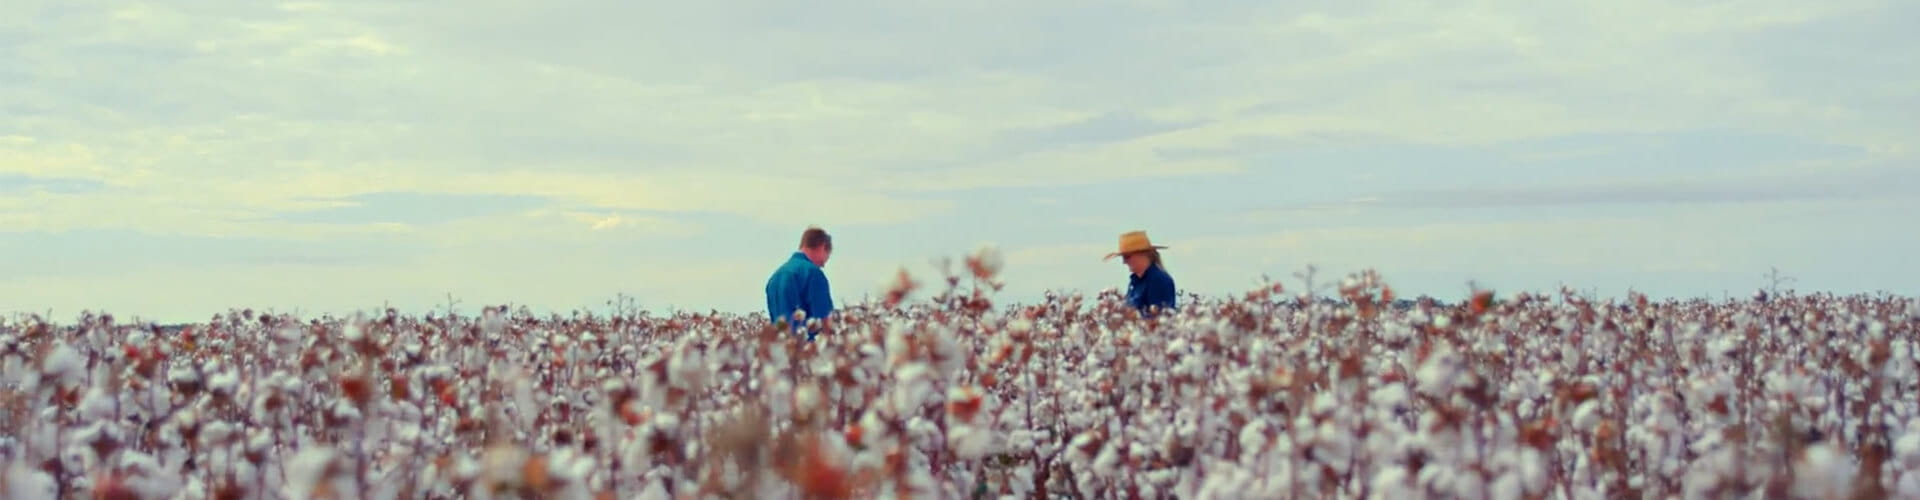 Two people stand in a vast cotton field under a cloudy sky, with cotton plants in the foreground.